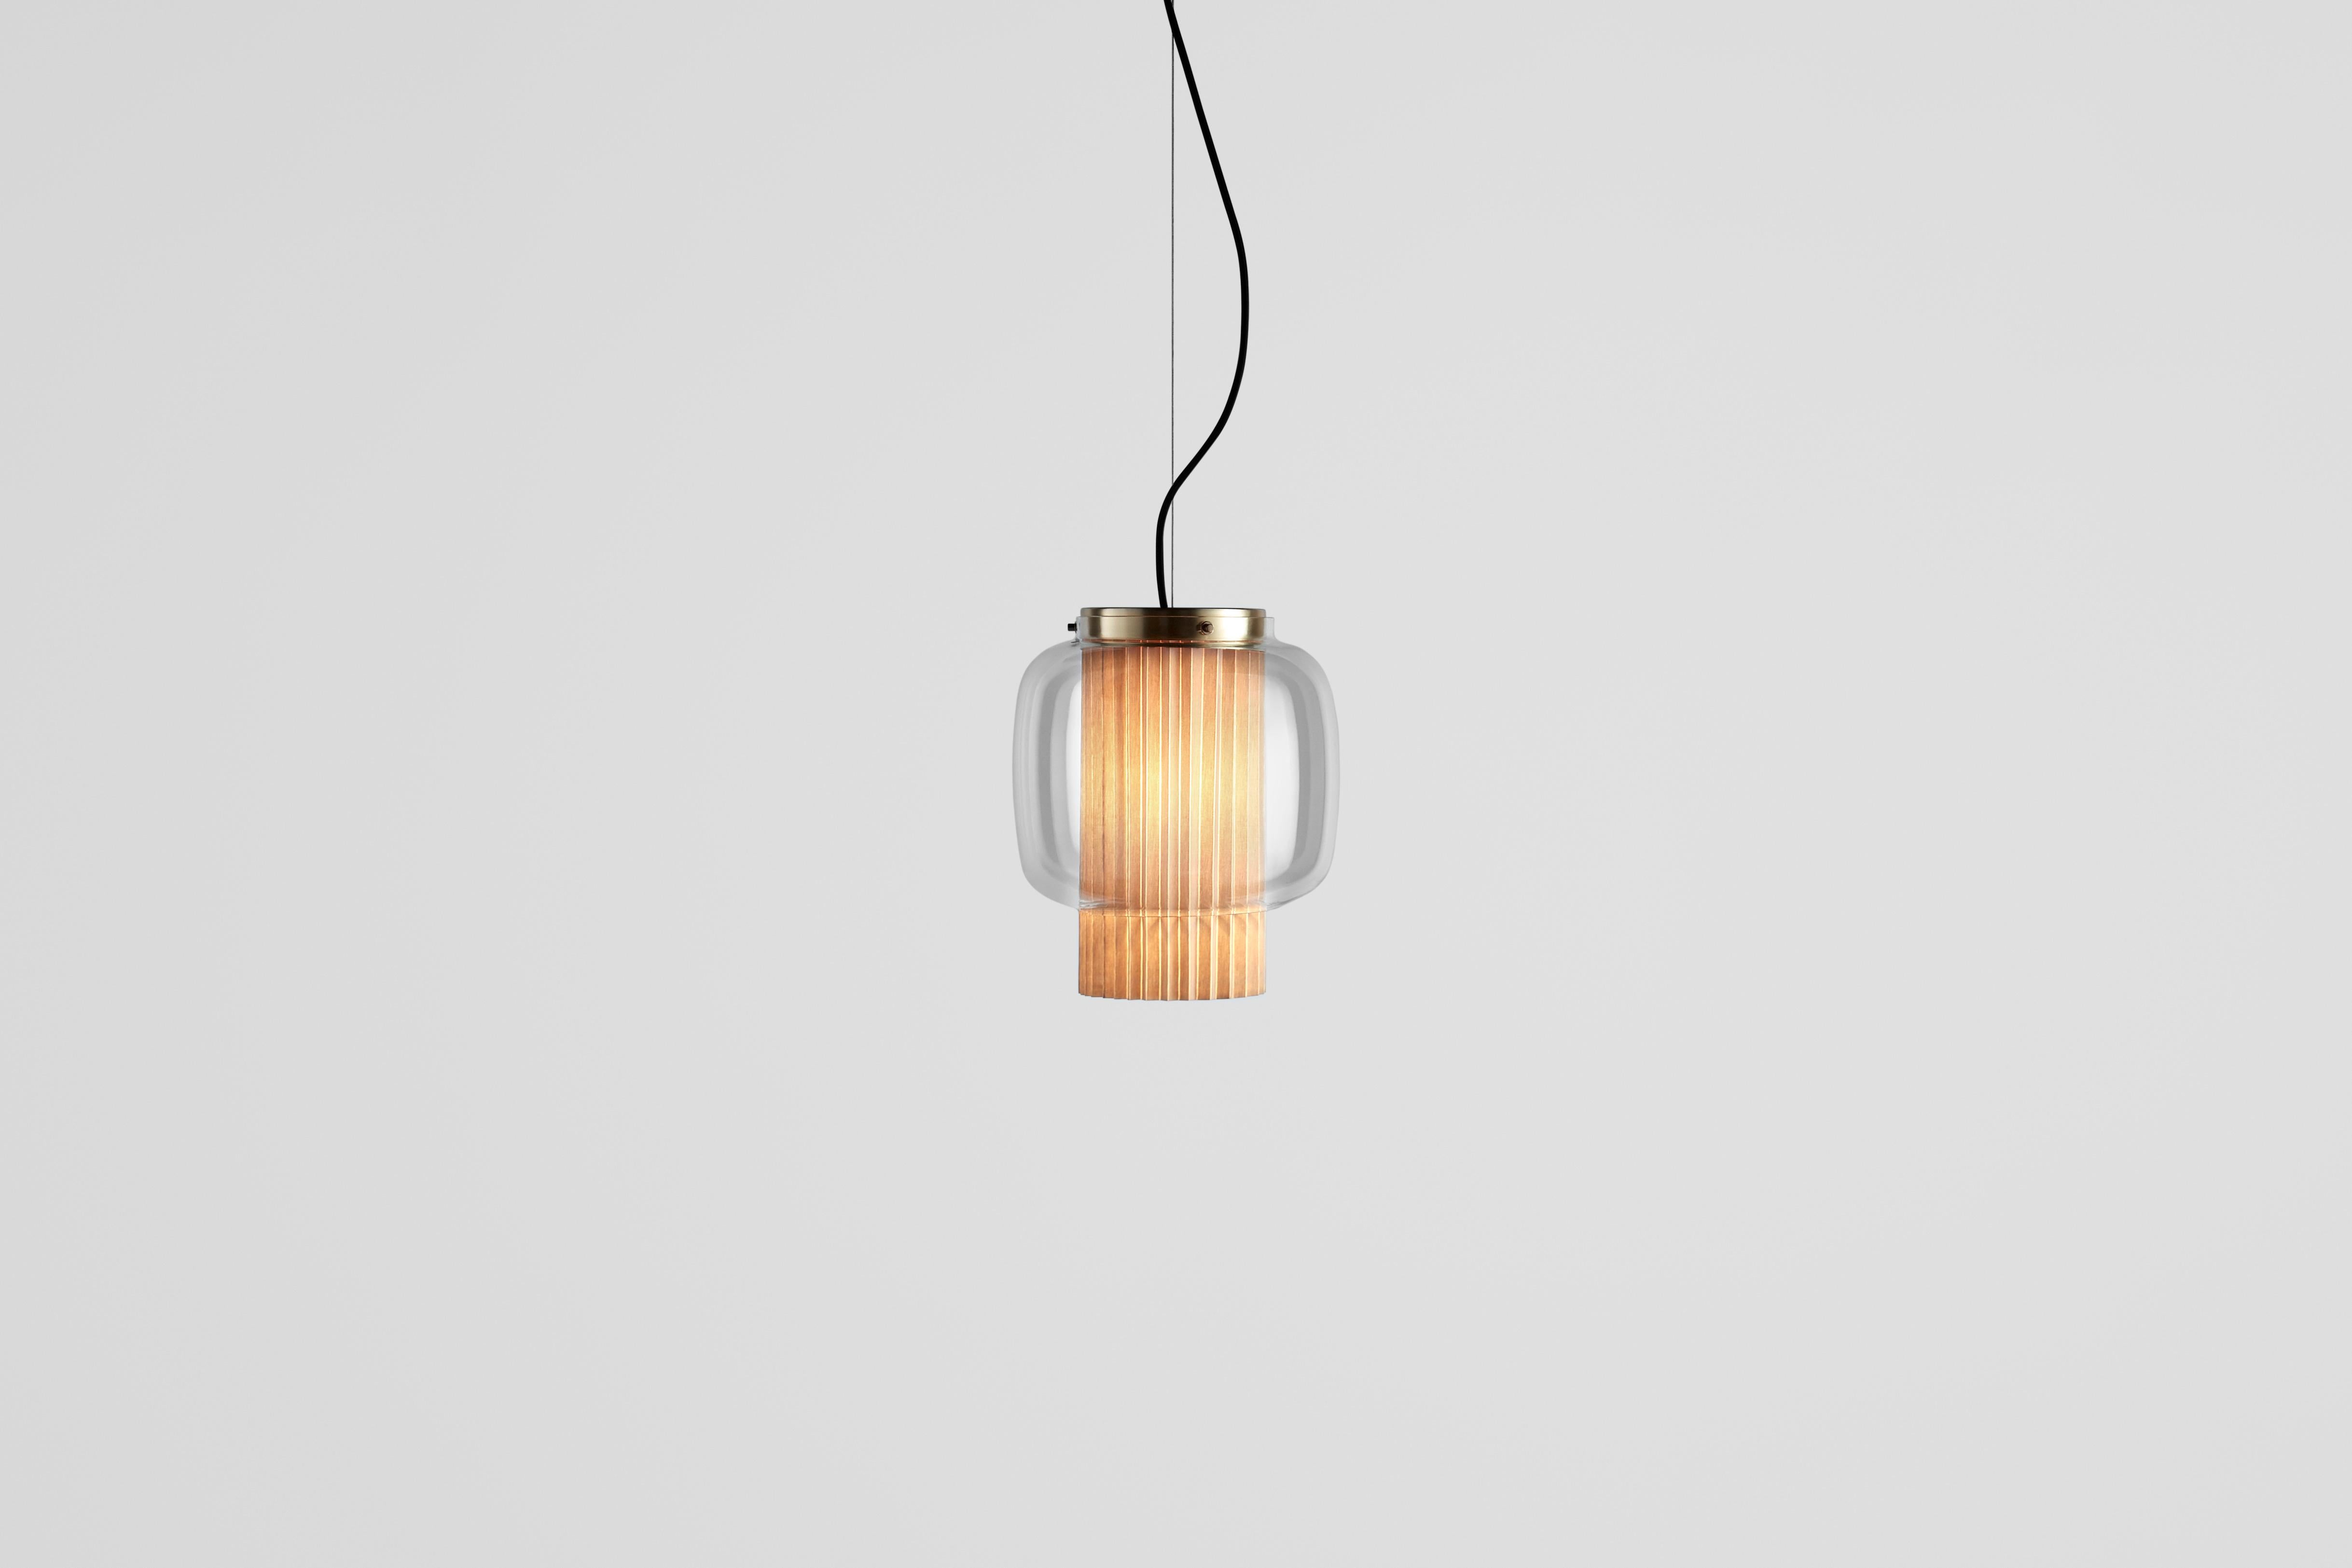 Manila T PE by Sebastian Herkner
An incredibly elegant combination of artisanal blown glass and a plissé textile diffuser. Its name comes from Spanish 